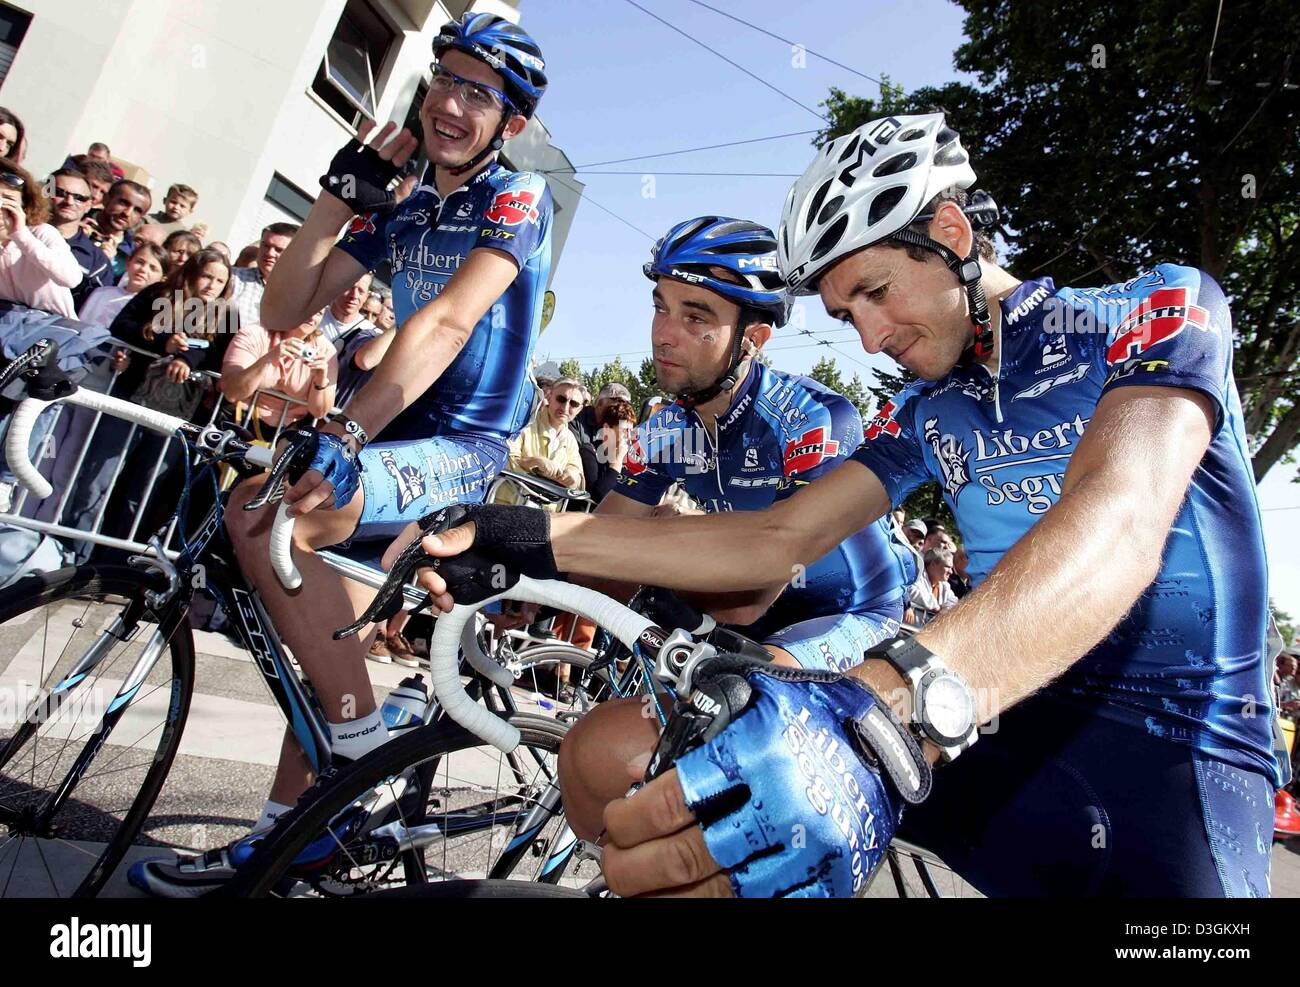 (dpa) - The Spanish cyclists of team Liberty Seguros, Isidro Nozal (L-R), Angel Vicioso and Roberto Heras joke around as they ride to the start of the 10th stage of the Tour de France cycle race in Limoges, France, 14 July 2004. The first mountainous stage of the Tour leads through the Massif Central from Limoges to Saint-Flour. With 237 km it is also the longest stage of the 2004  Stock Photo